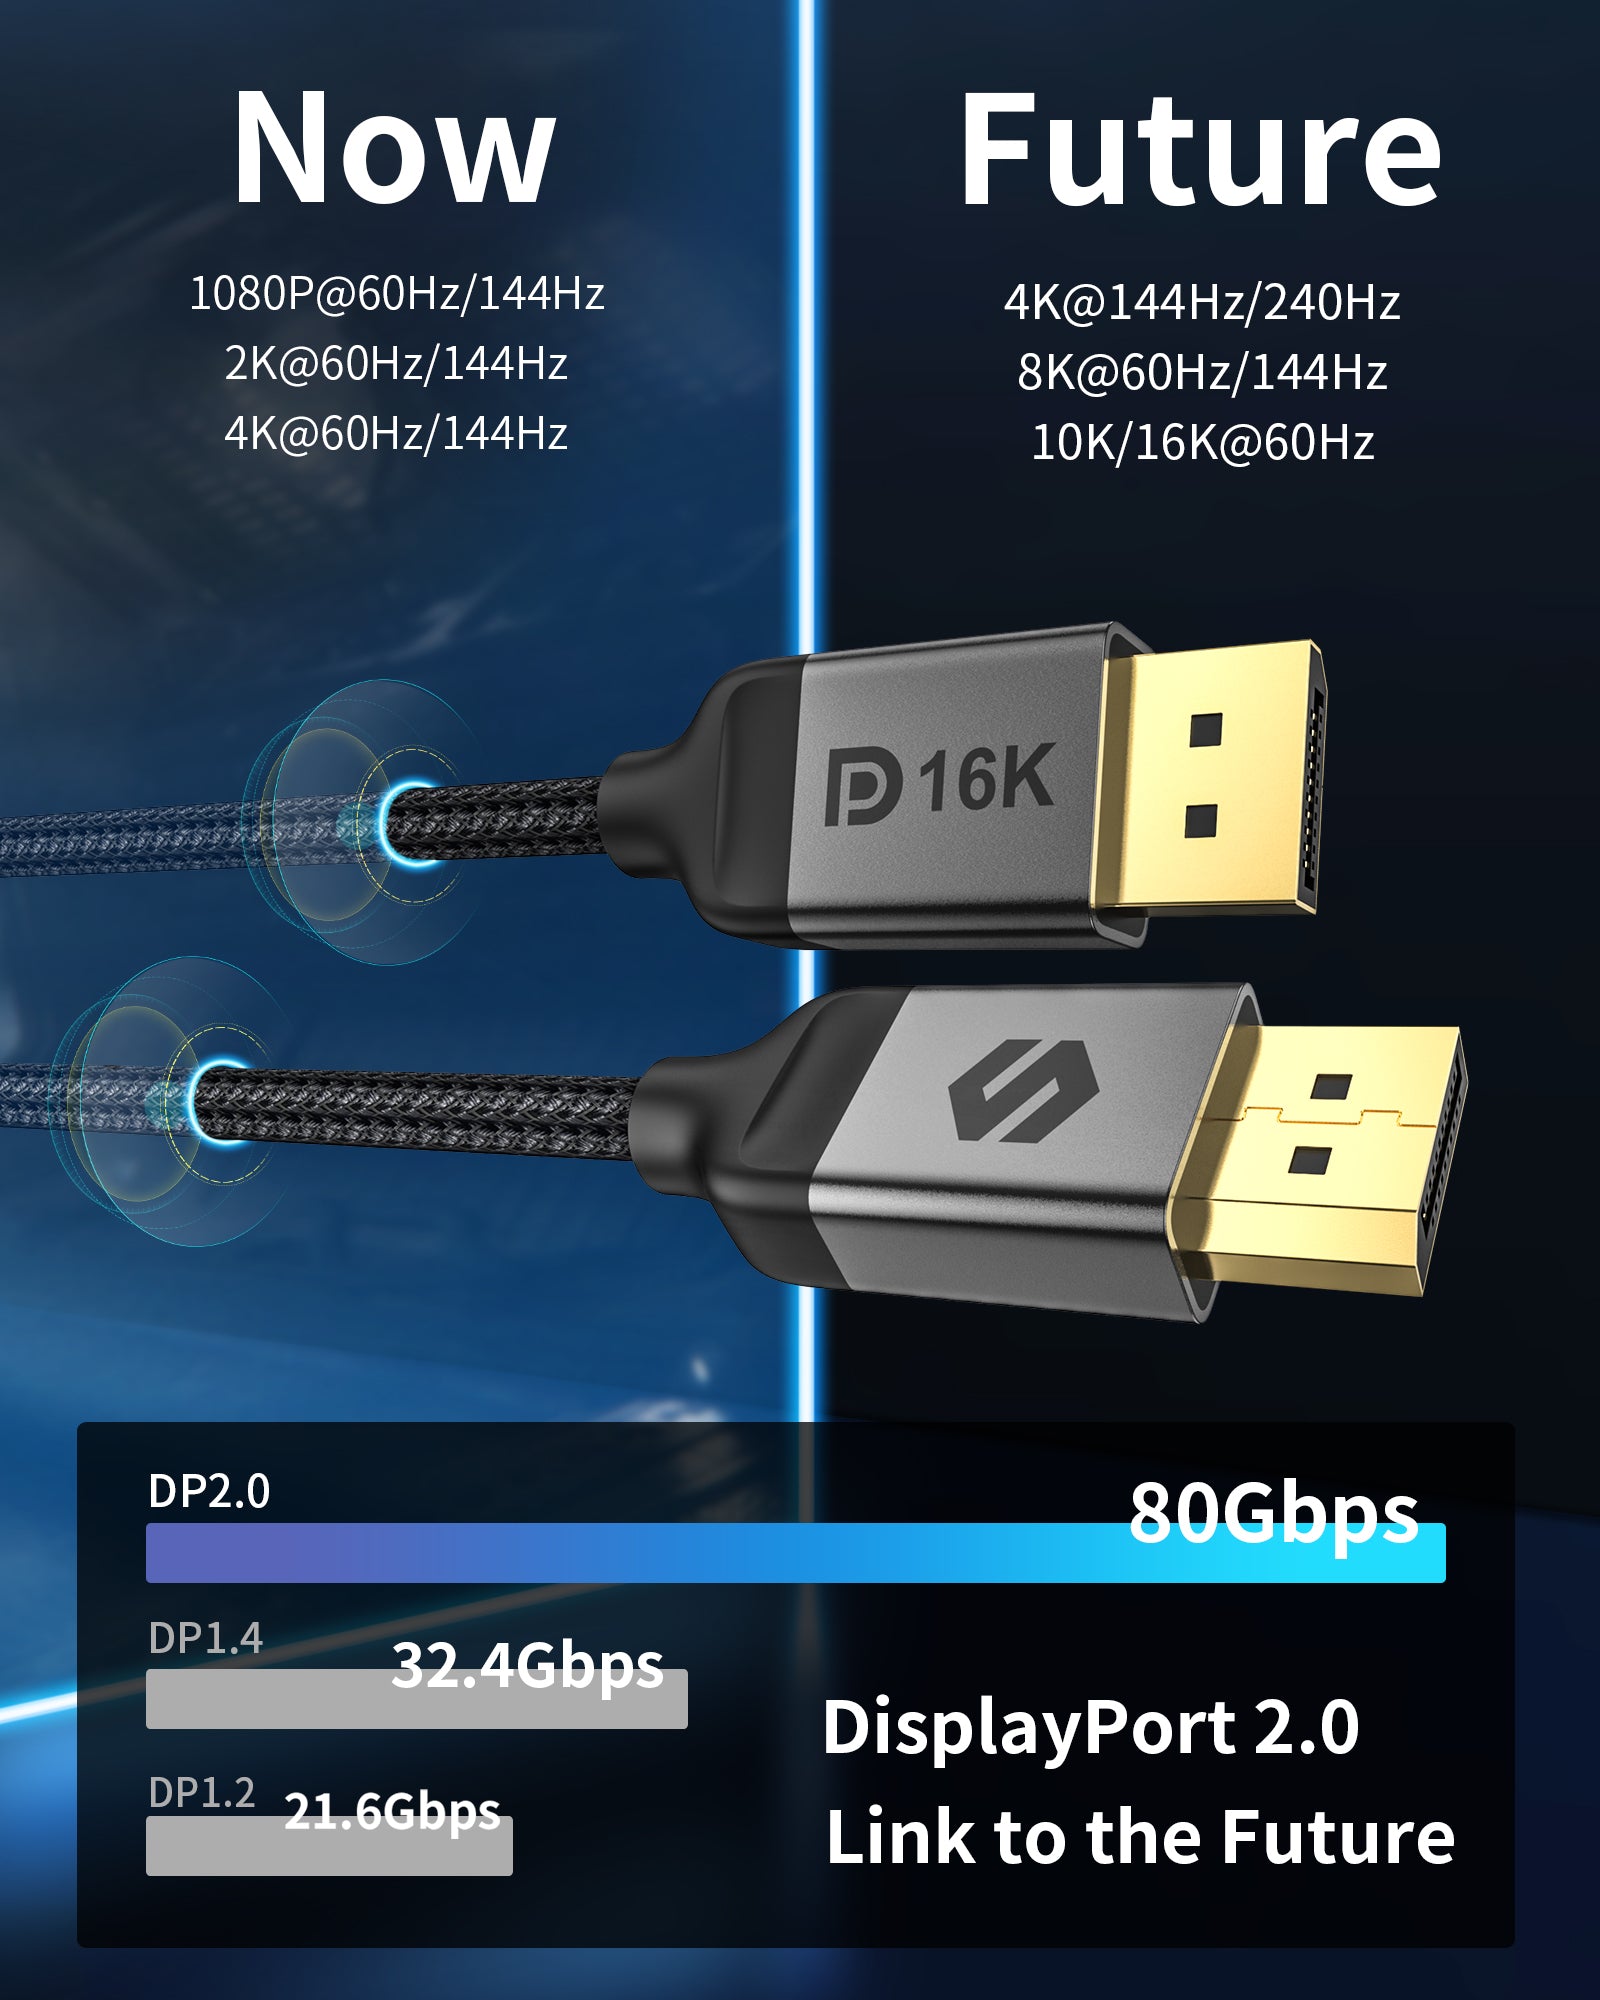 VESA Certified DisplayPort Cable - DP1.4 for 8K or gaming with up to 240Hz